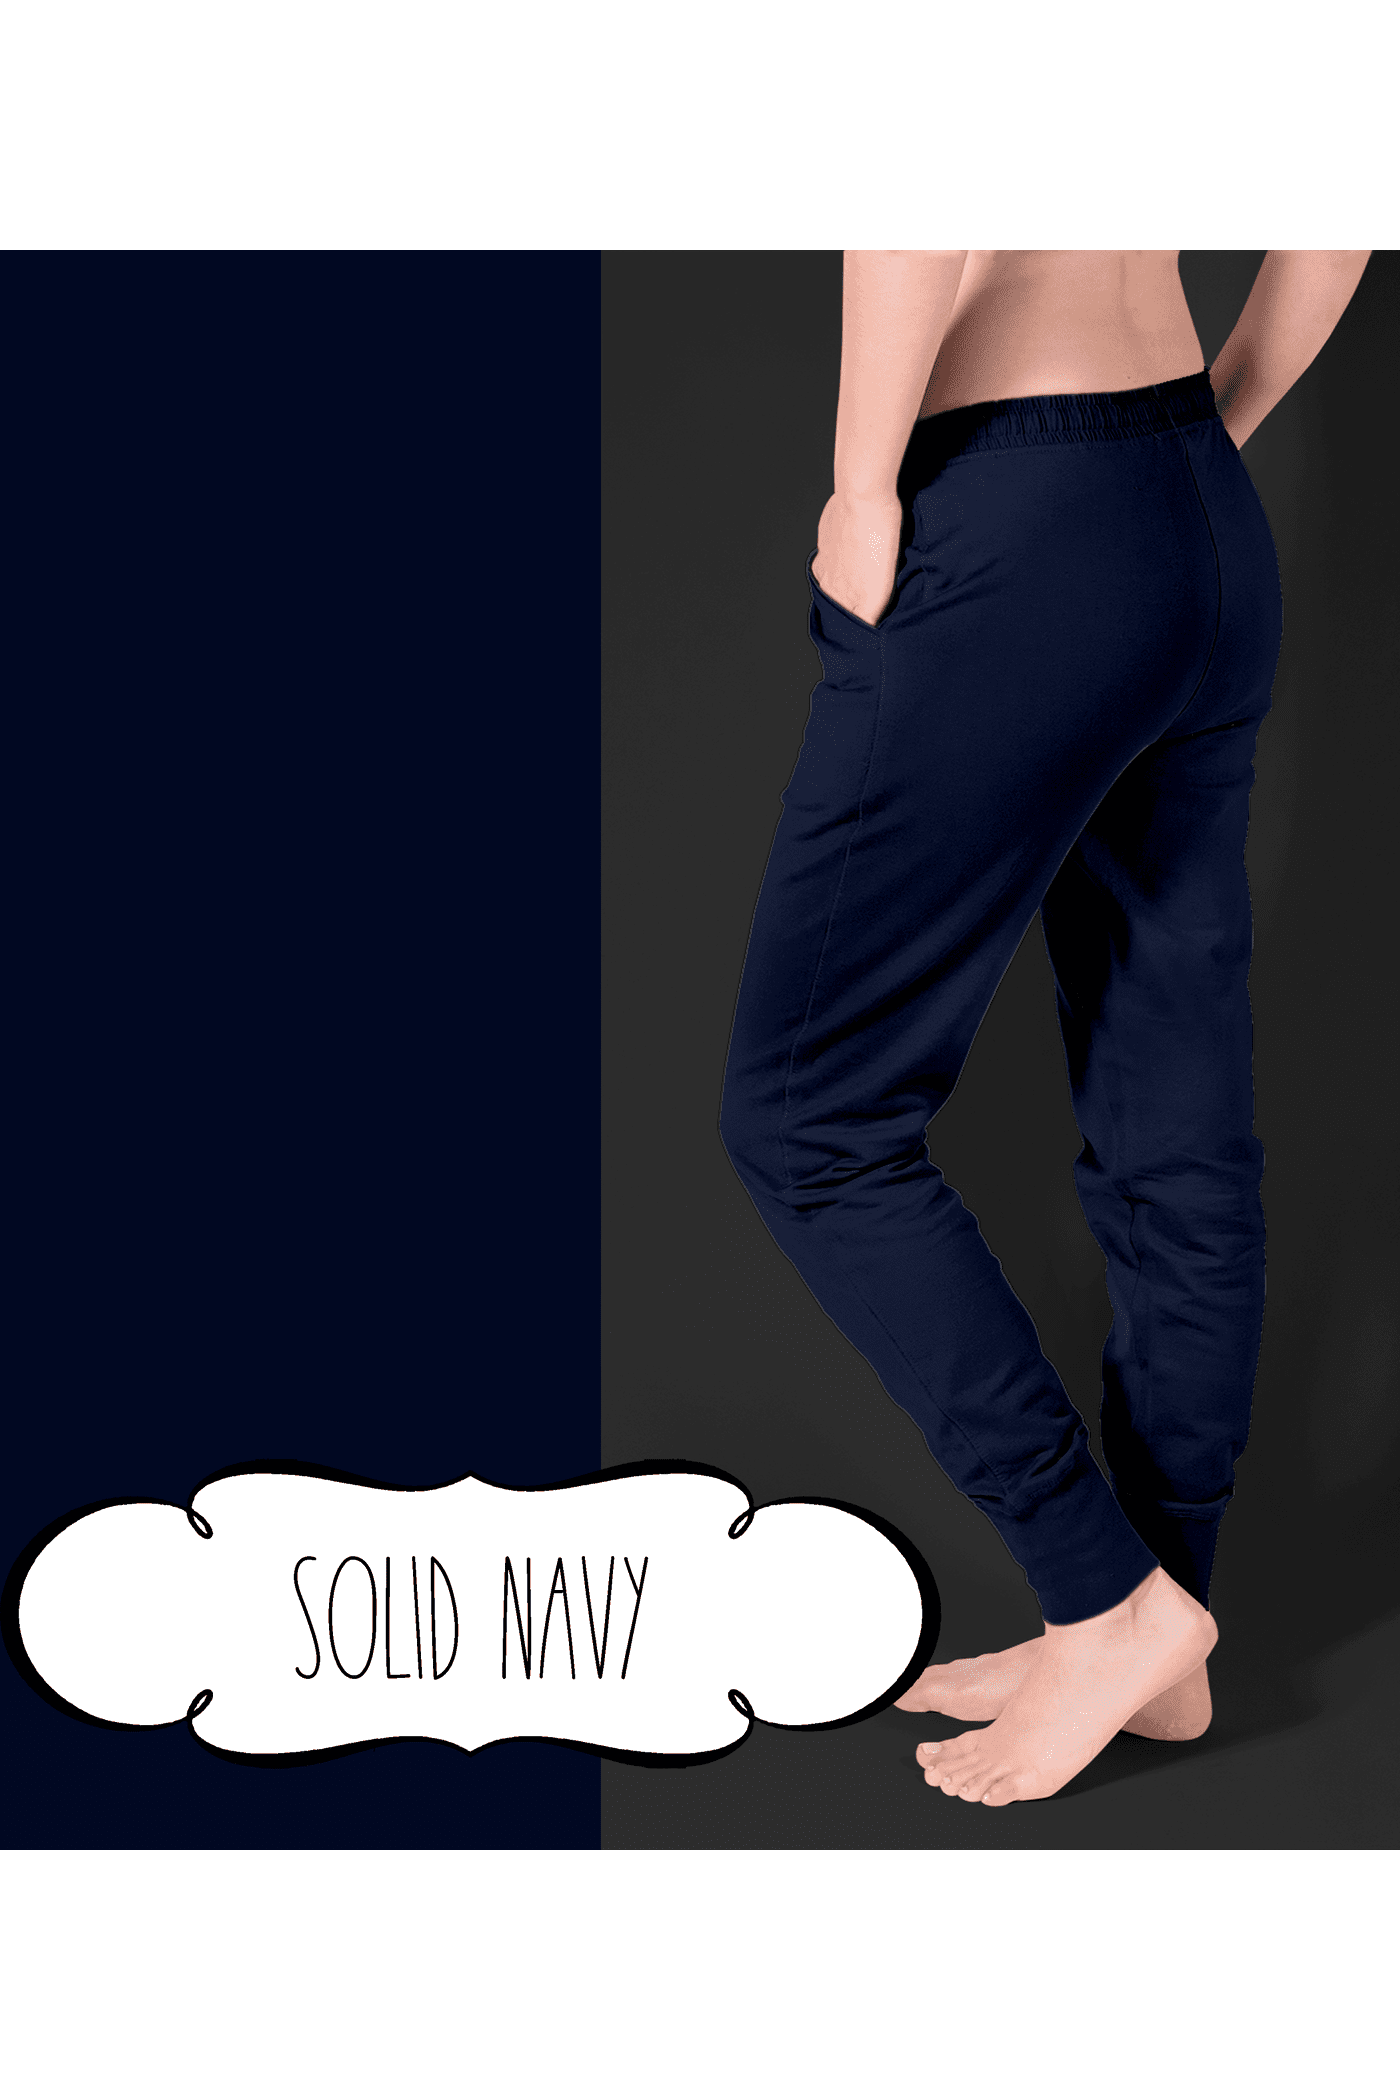 Joggers - Solid Navy - by Eleven & Co.